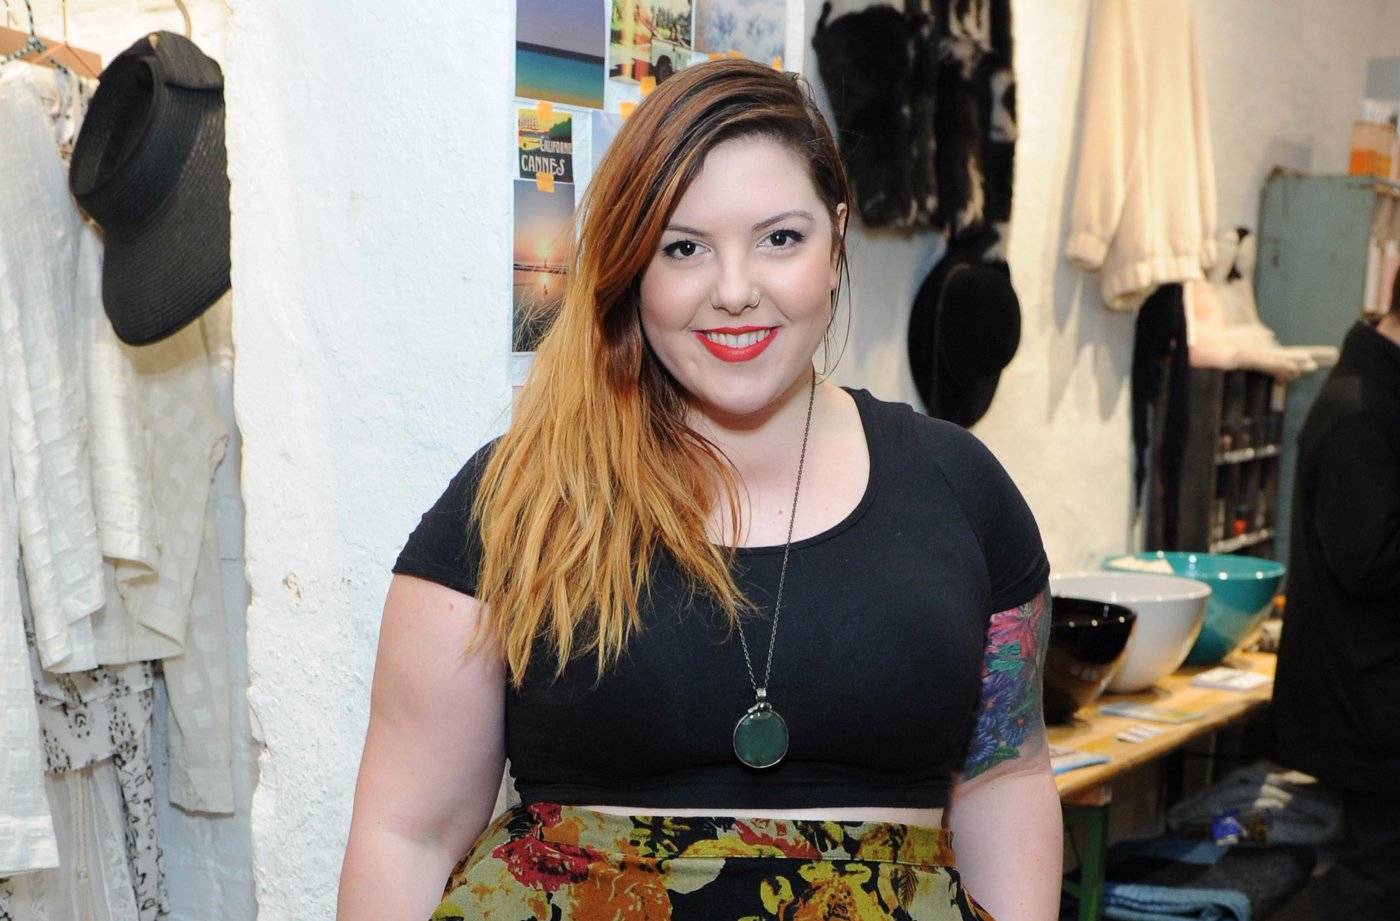 Poetry from Mary Lambert turns shame and anger into power